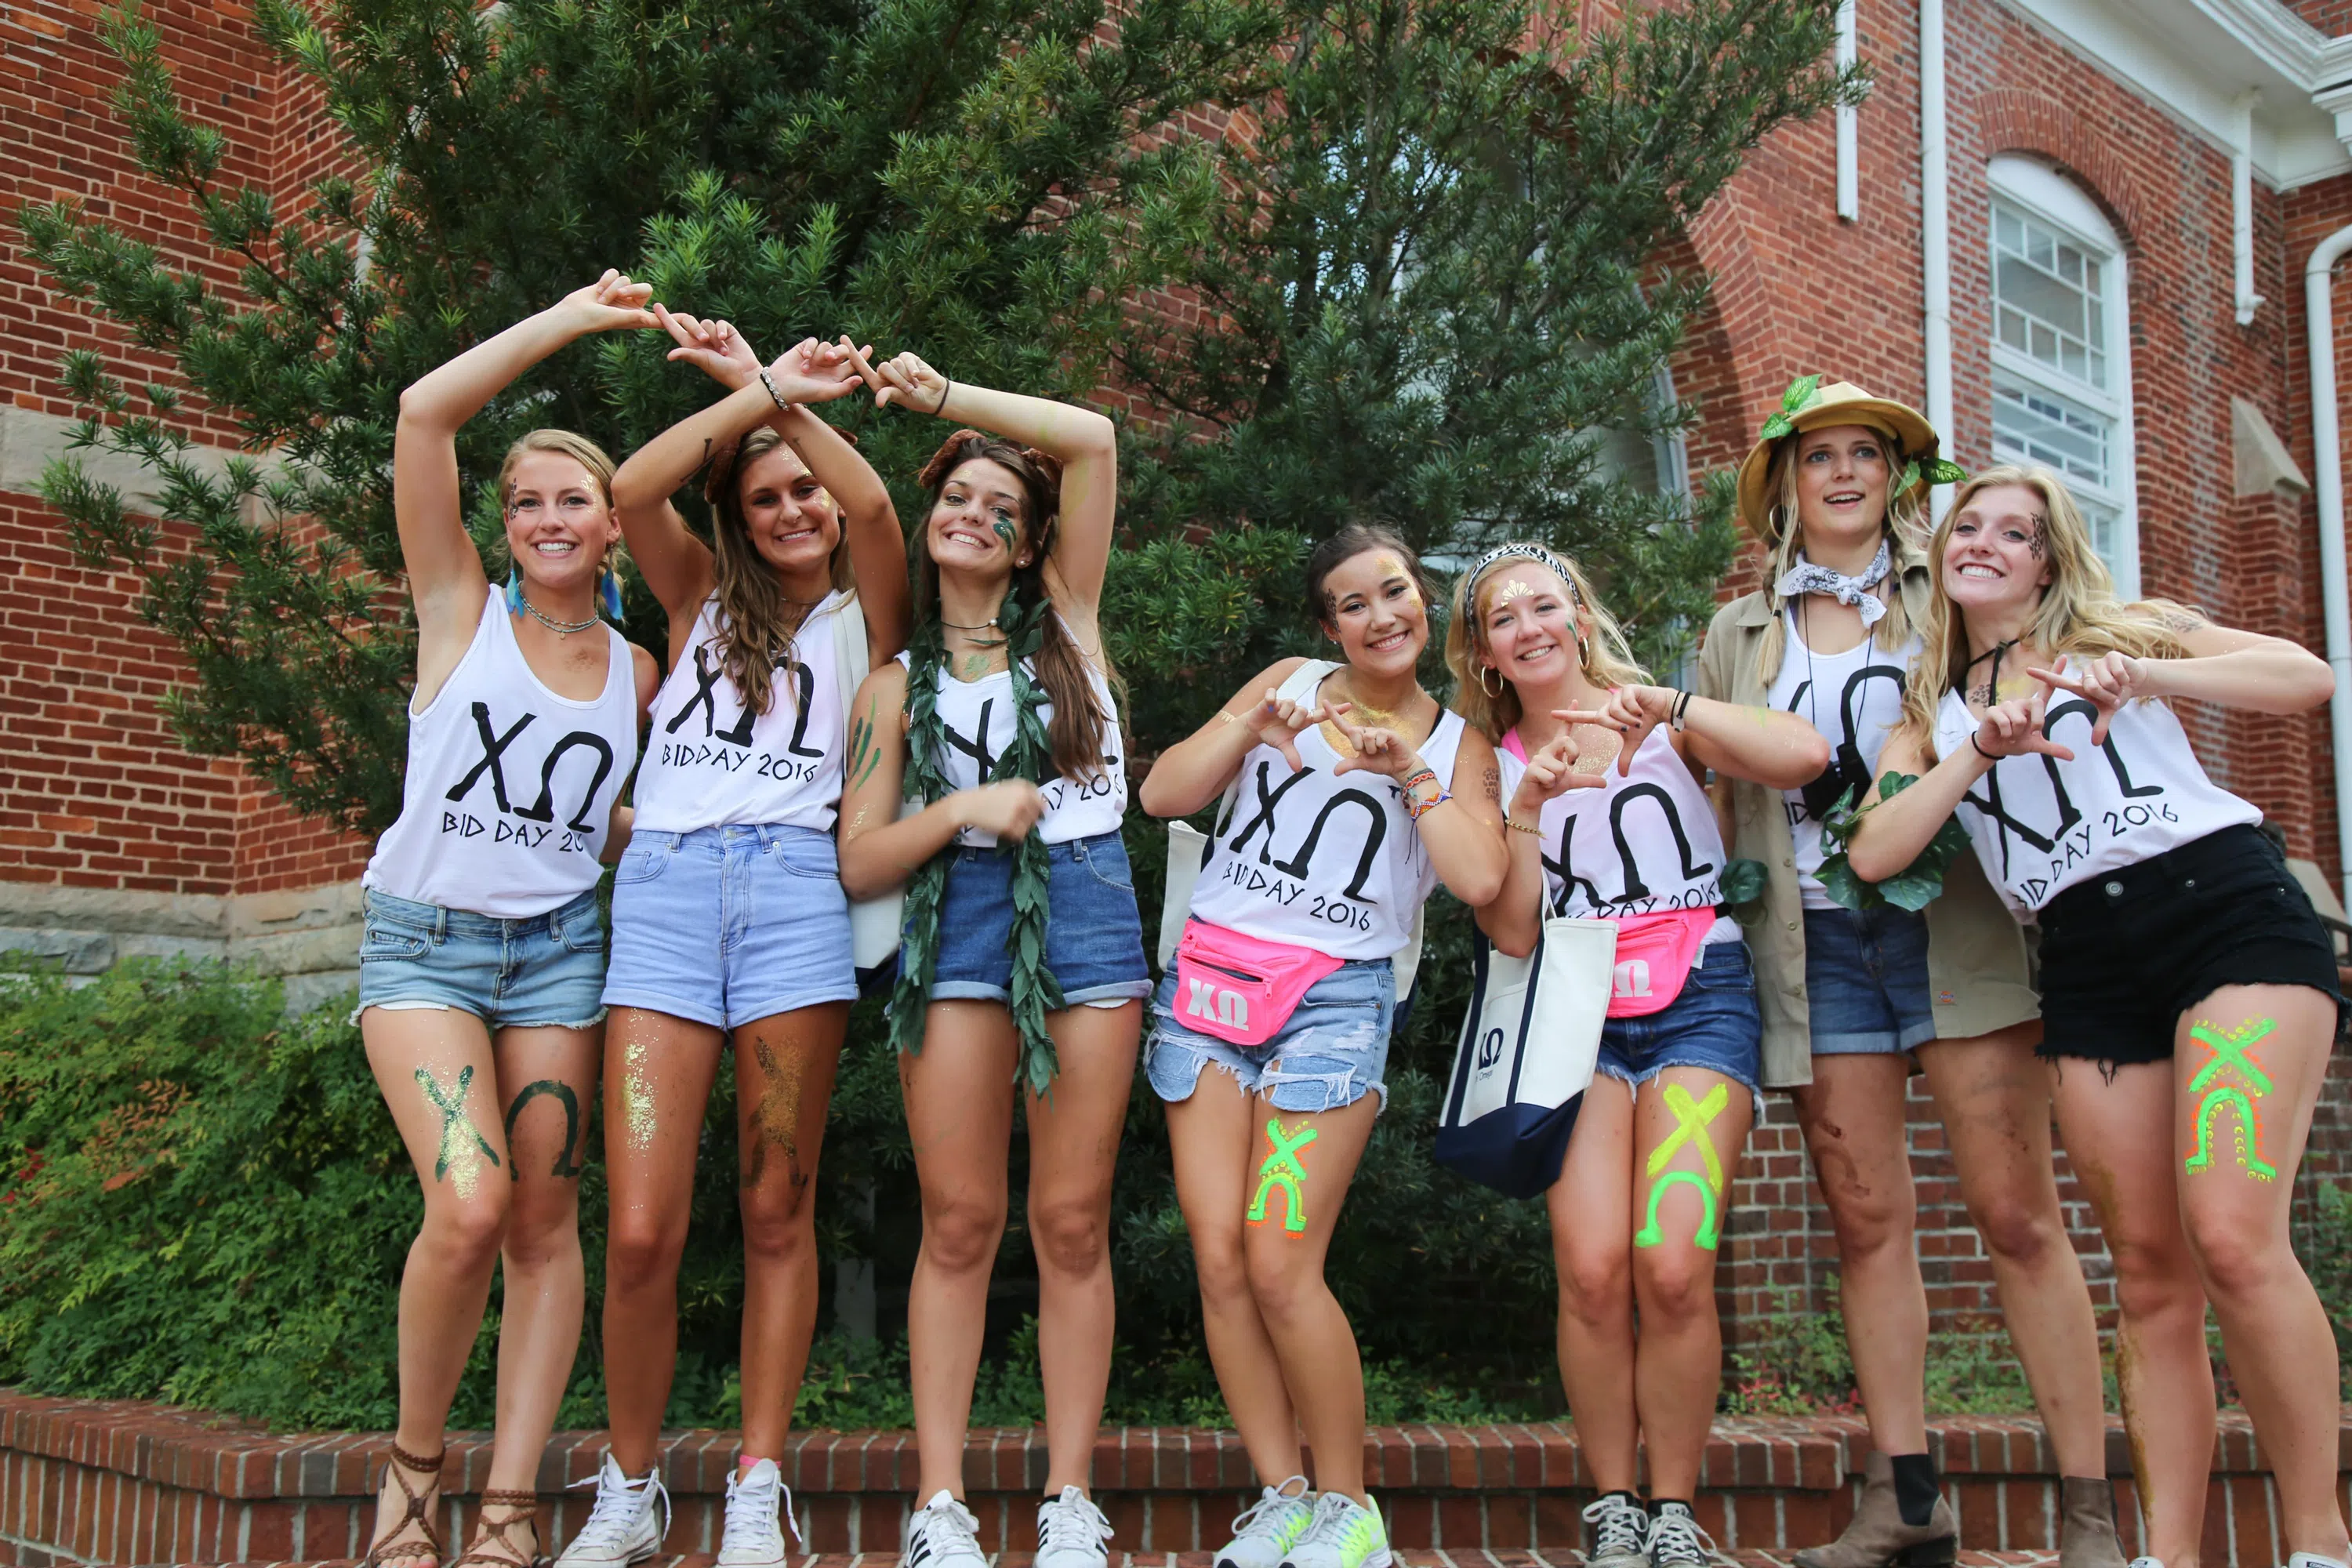 Students from the Chi Omega sorority pose for a photo on Bid Day.